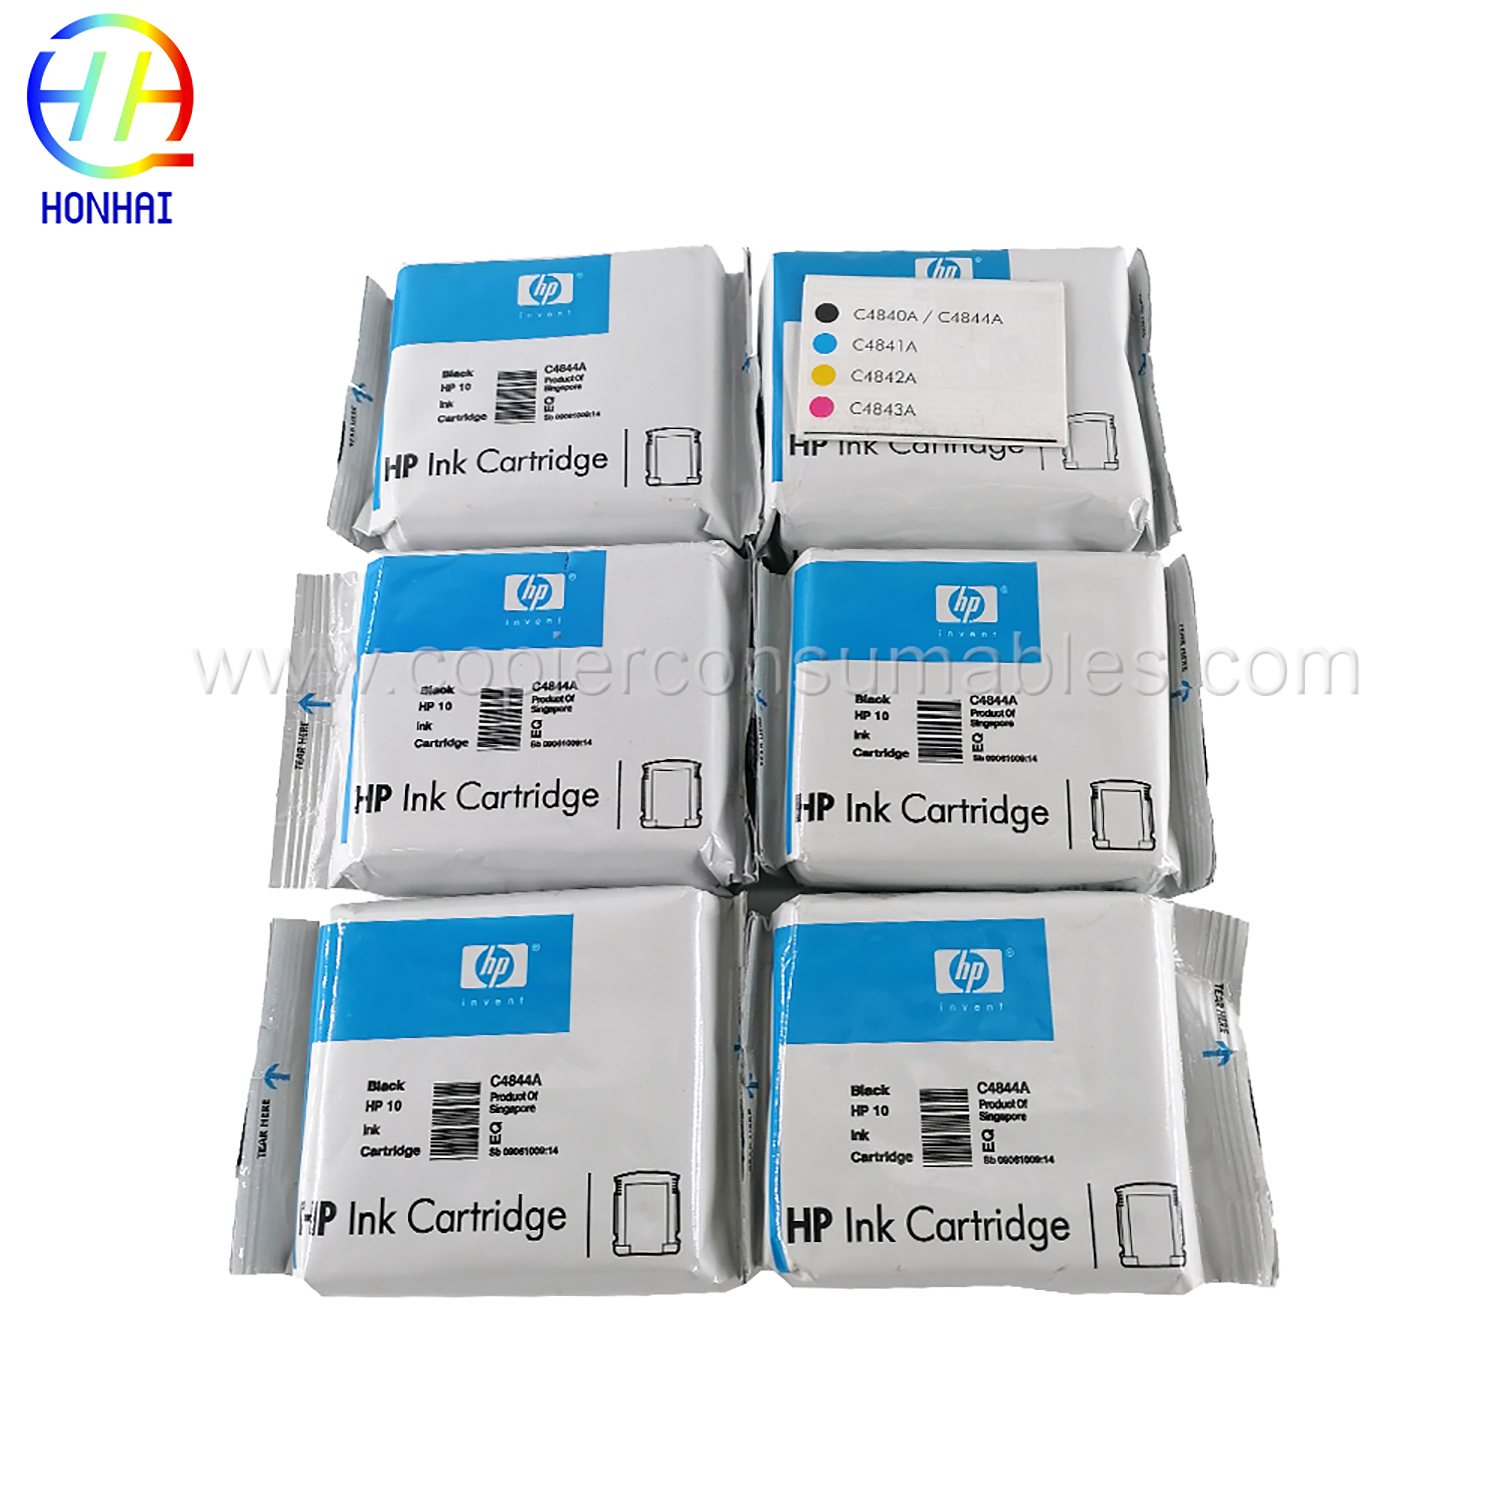 Ink Cartridge Black for HP 10 C4844A (1) 拷贝